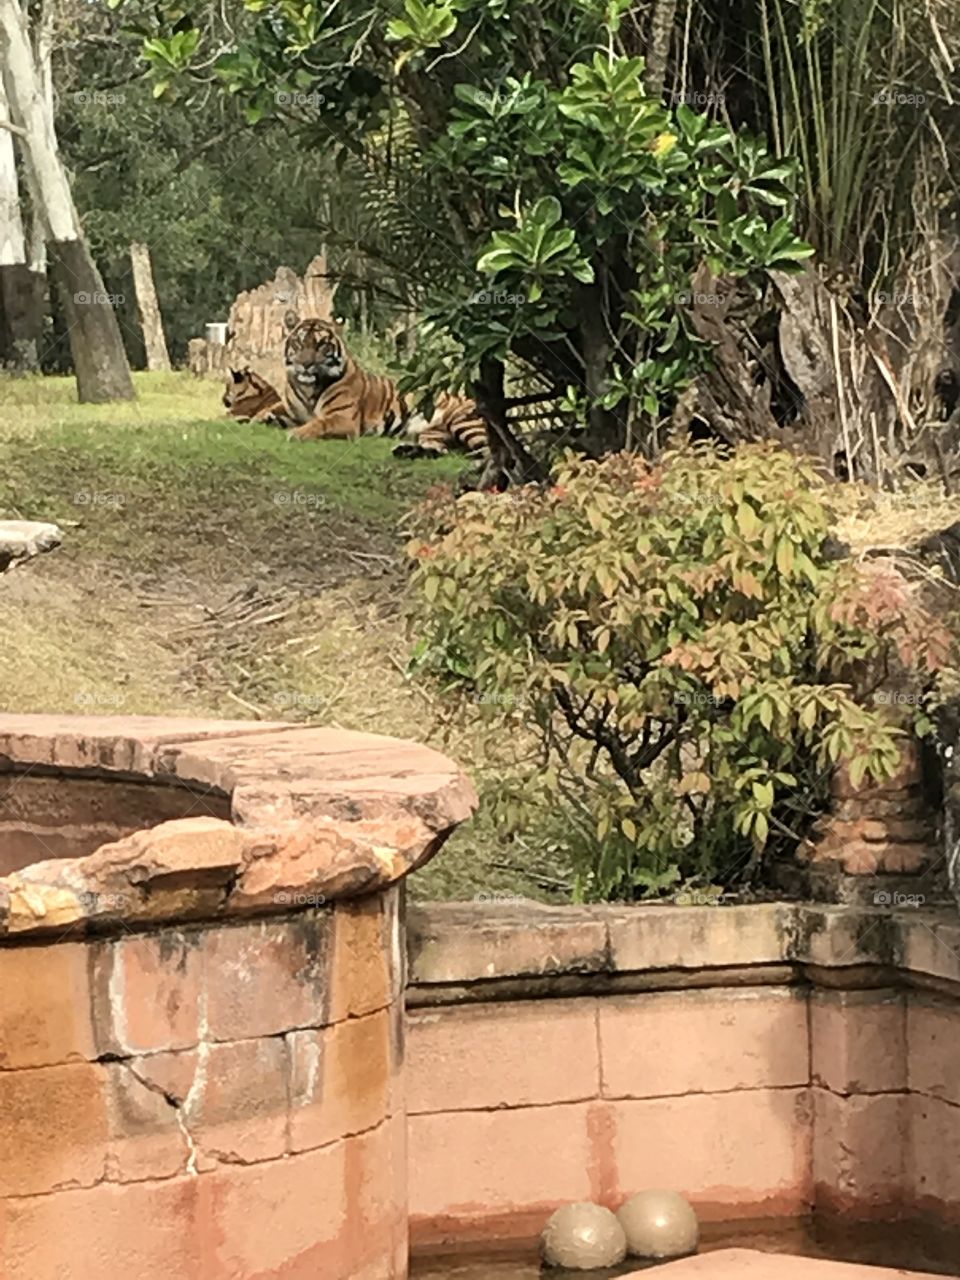 Tiger family in the distance 